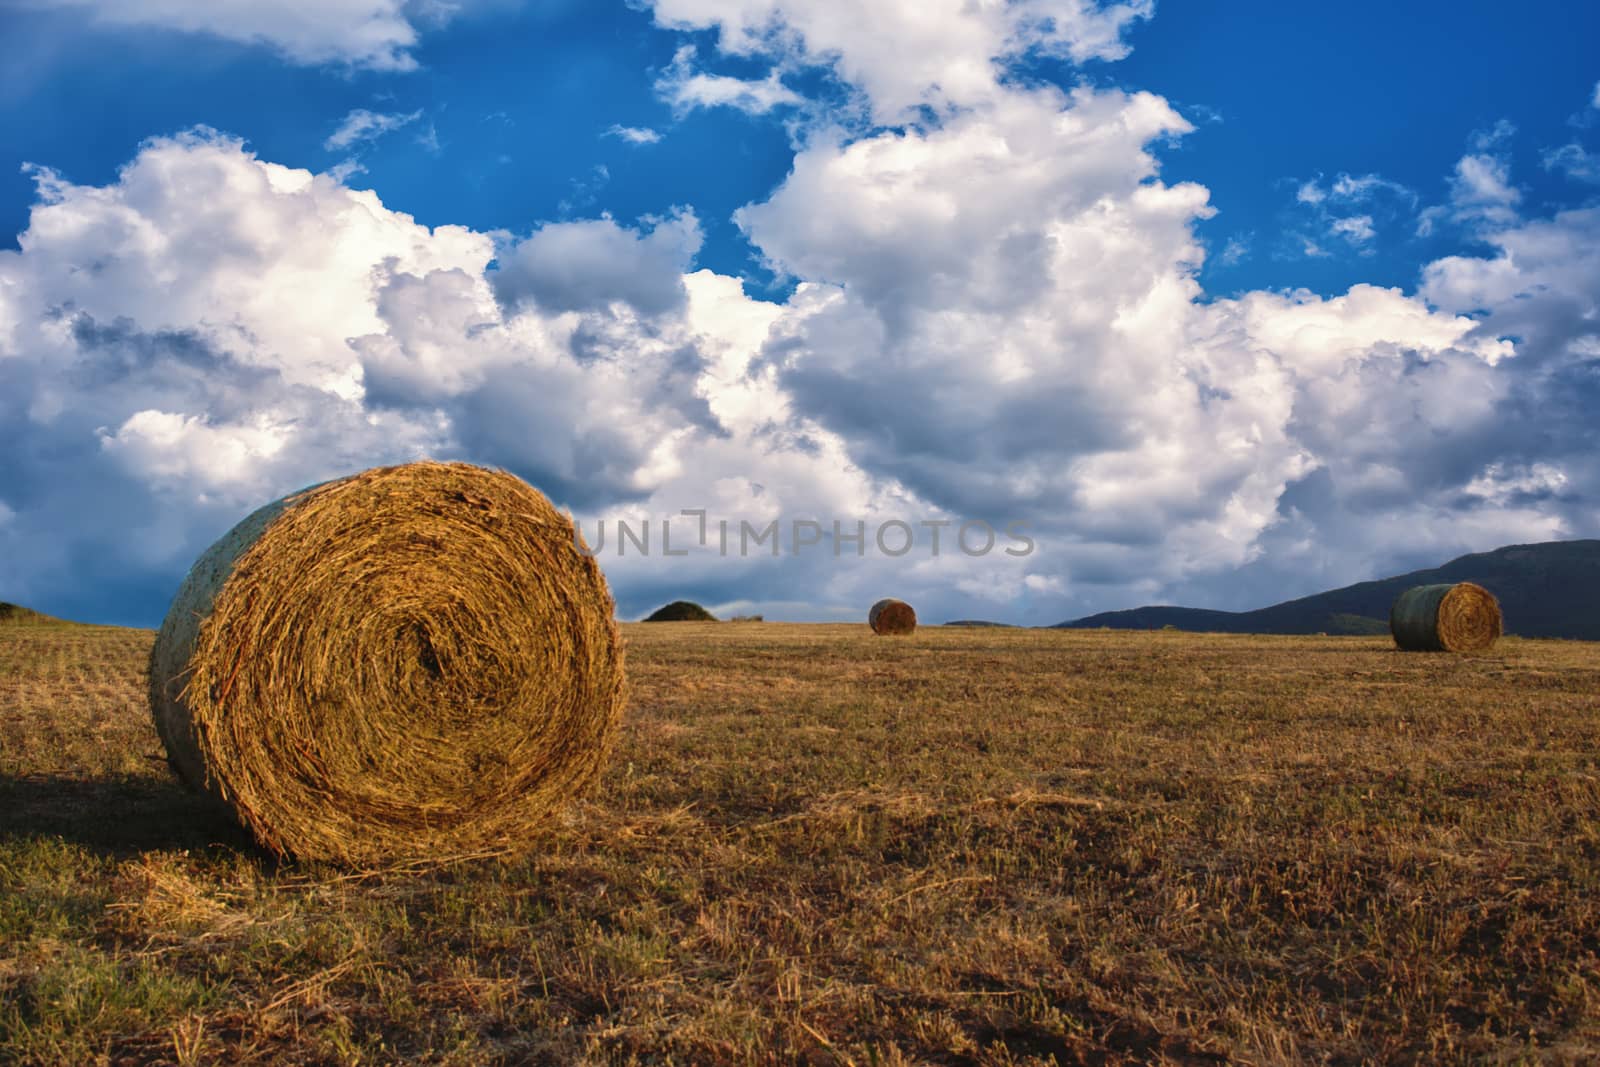 Hay bales on the field after harvest, a clear day. Blue sky, white clouds.